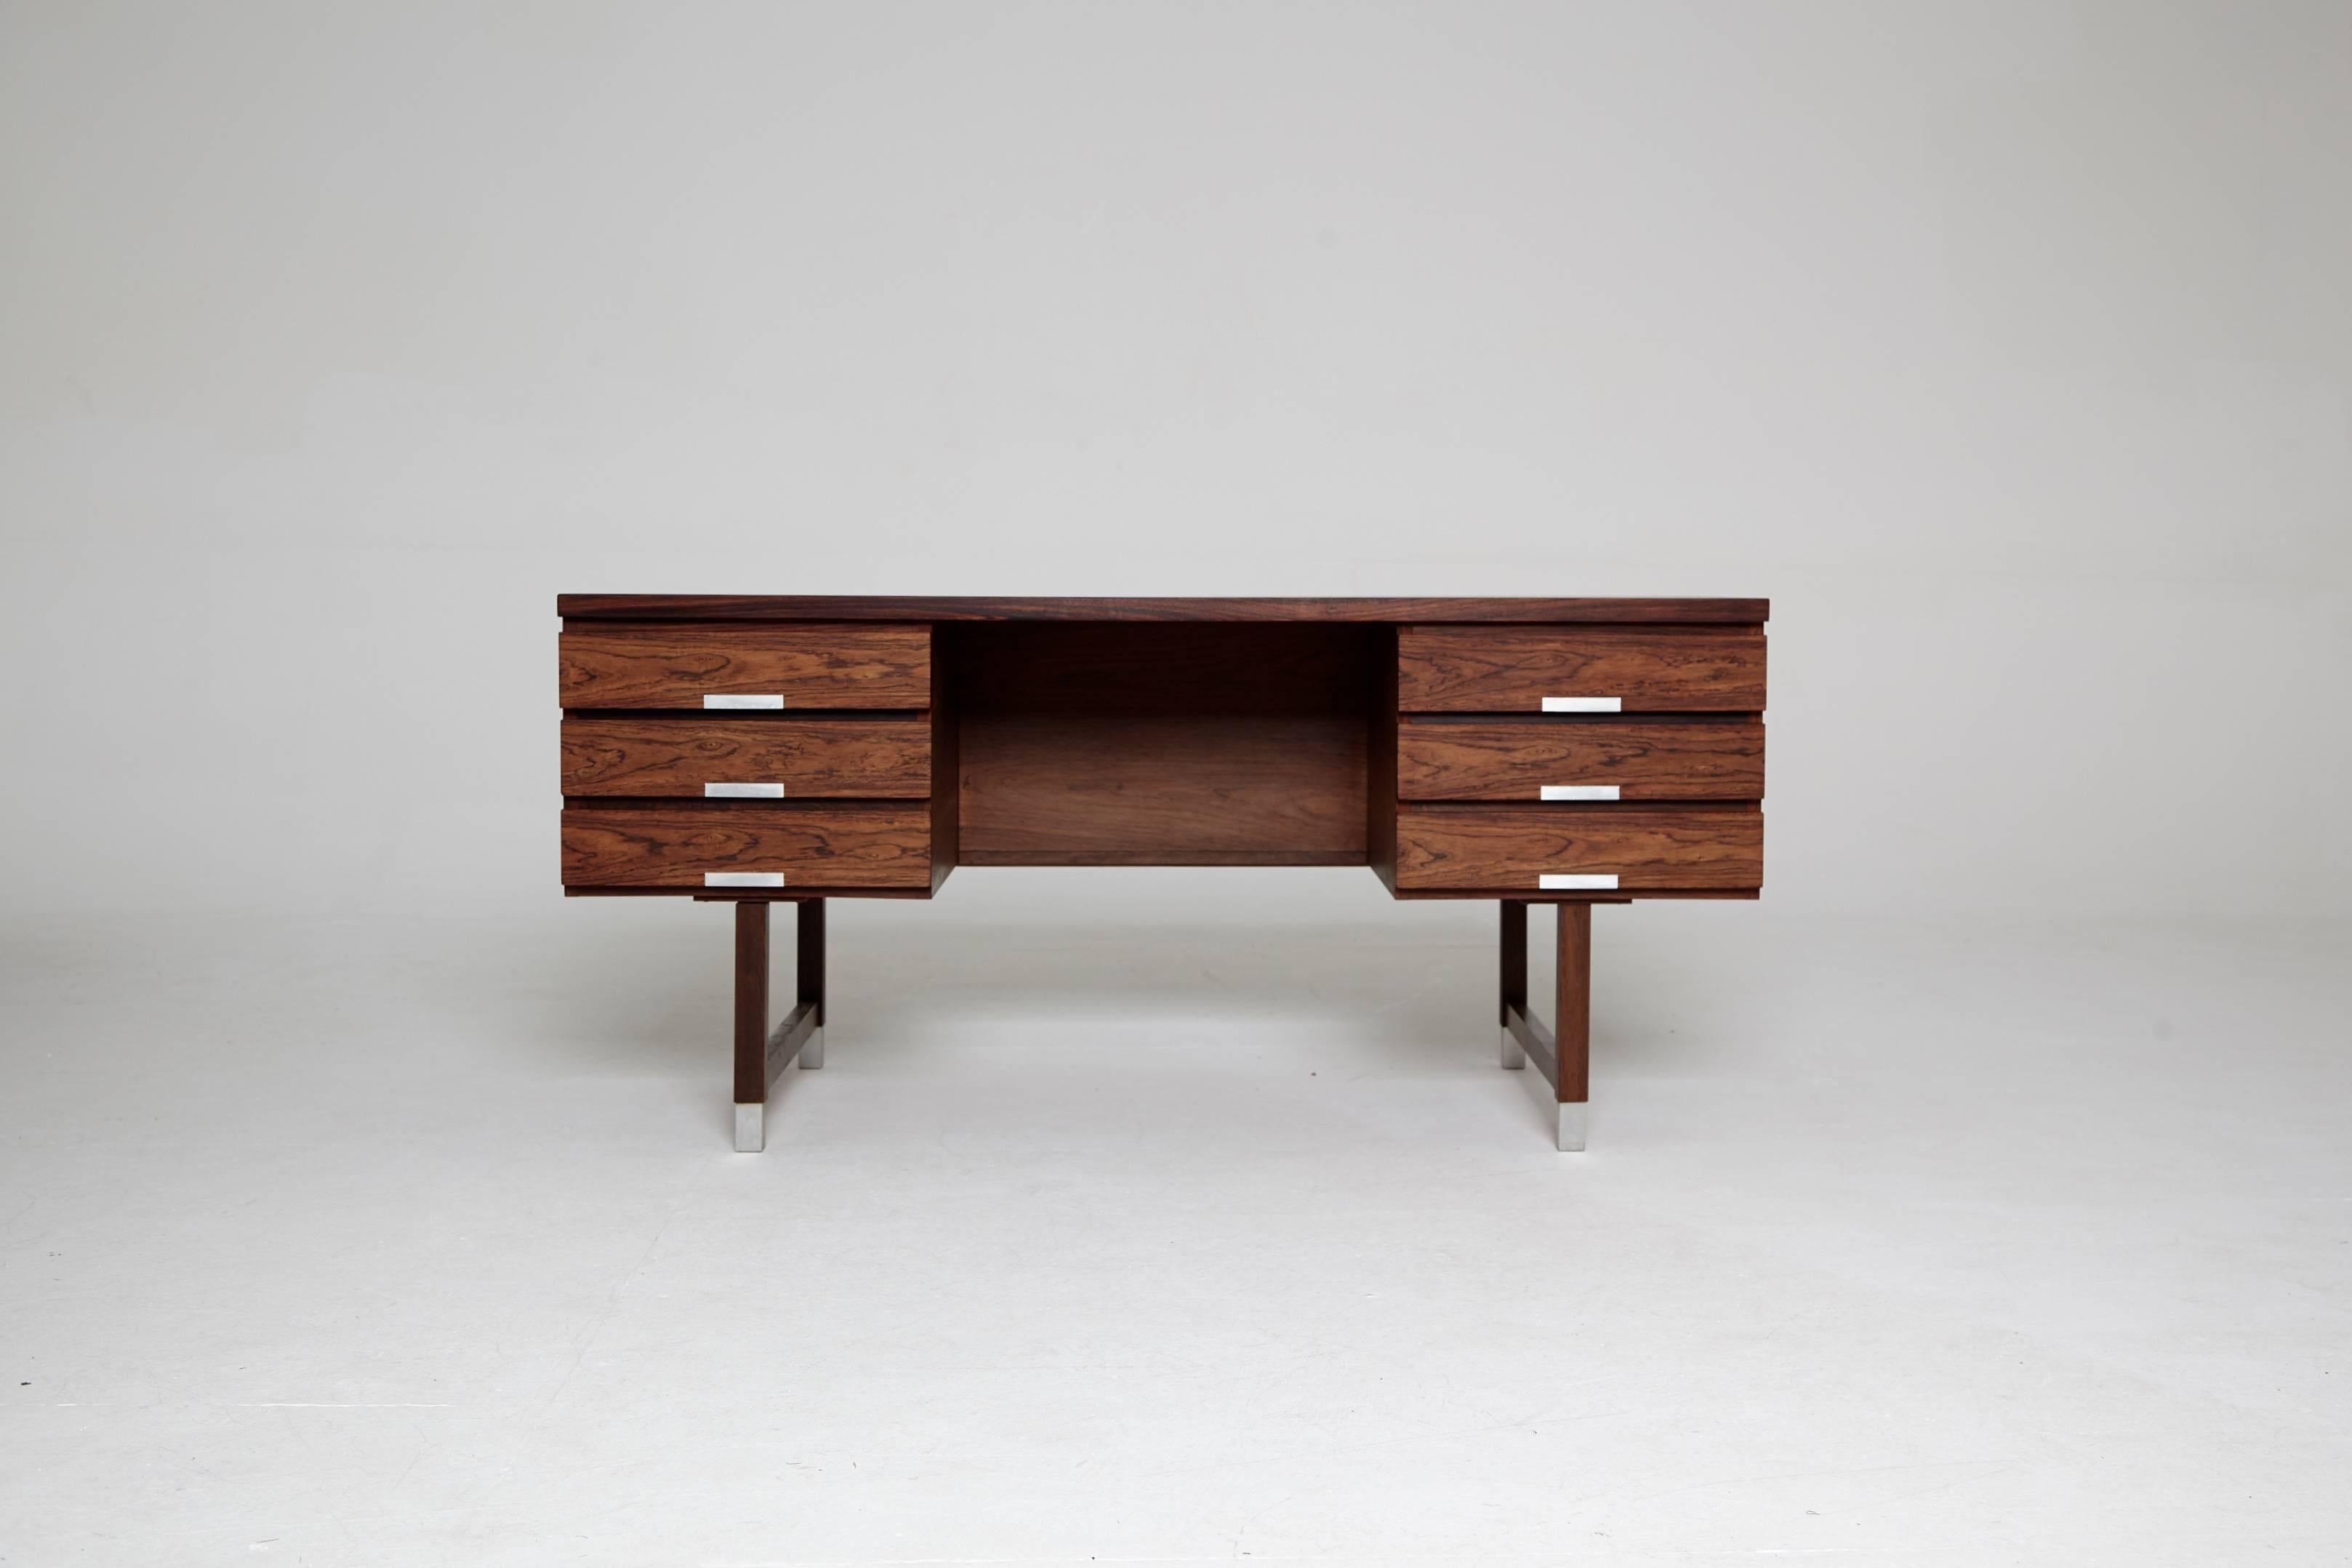 Midcentury rosewood writing desk by Kai Kristiansen, 1960s, Denmark. Front with six drawers, reverse side with shelves. Aluminum handles and shoes. In good original condition. Ships worldwide.
  
  